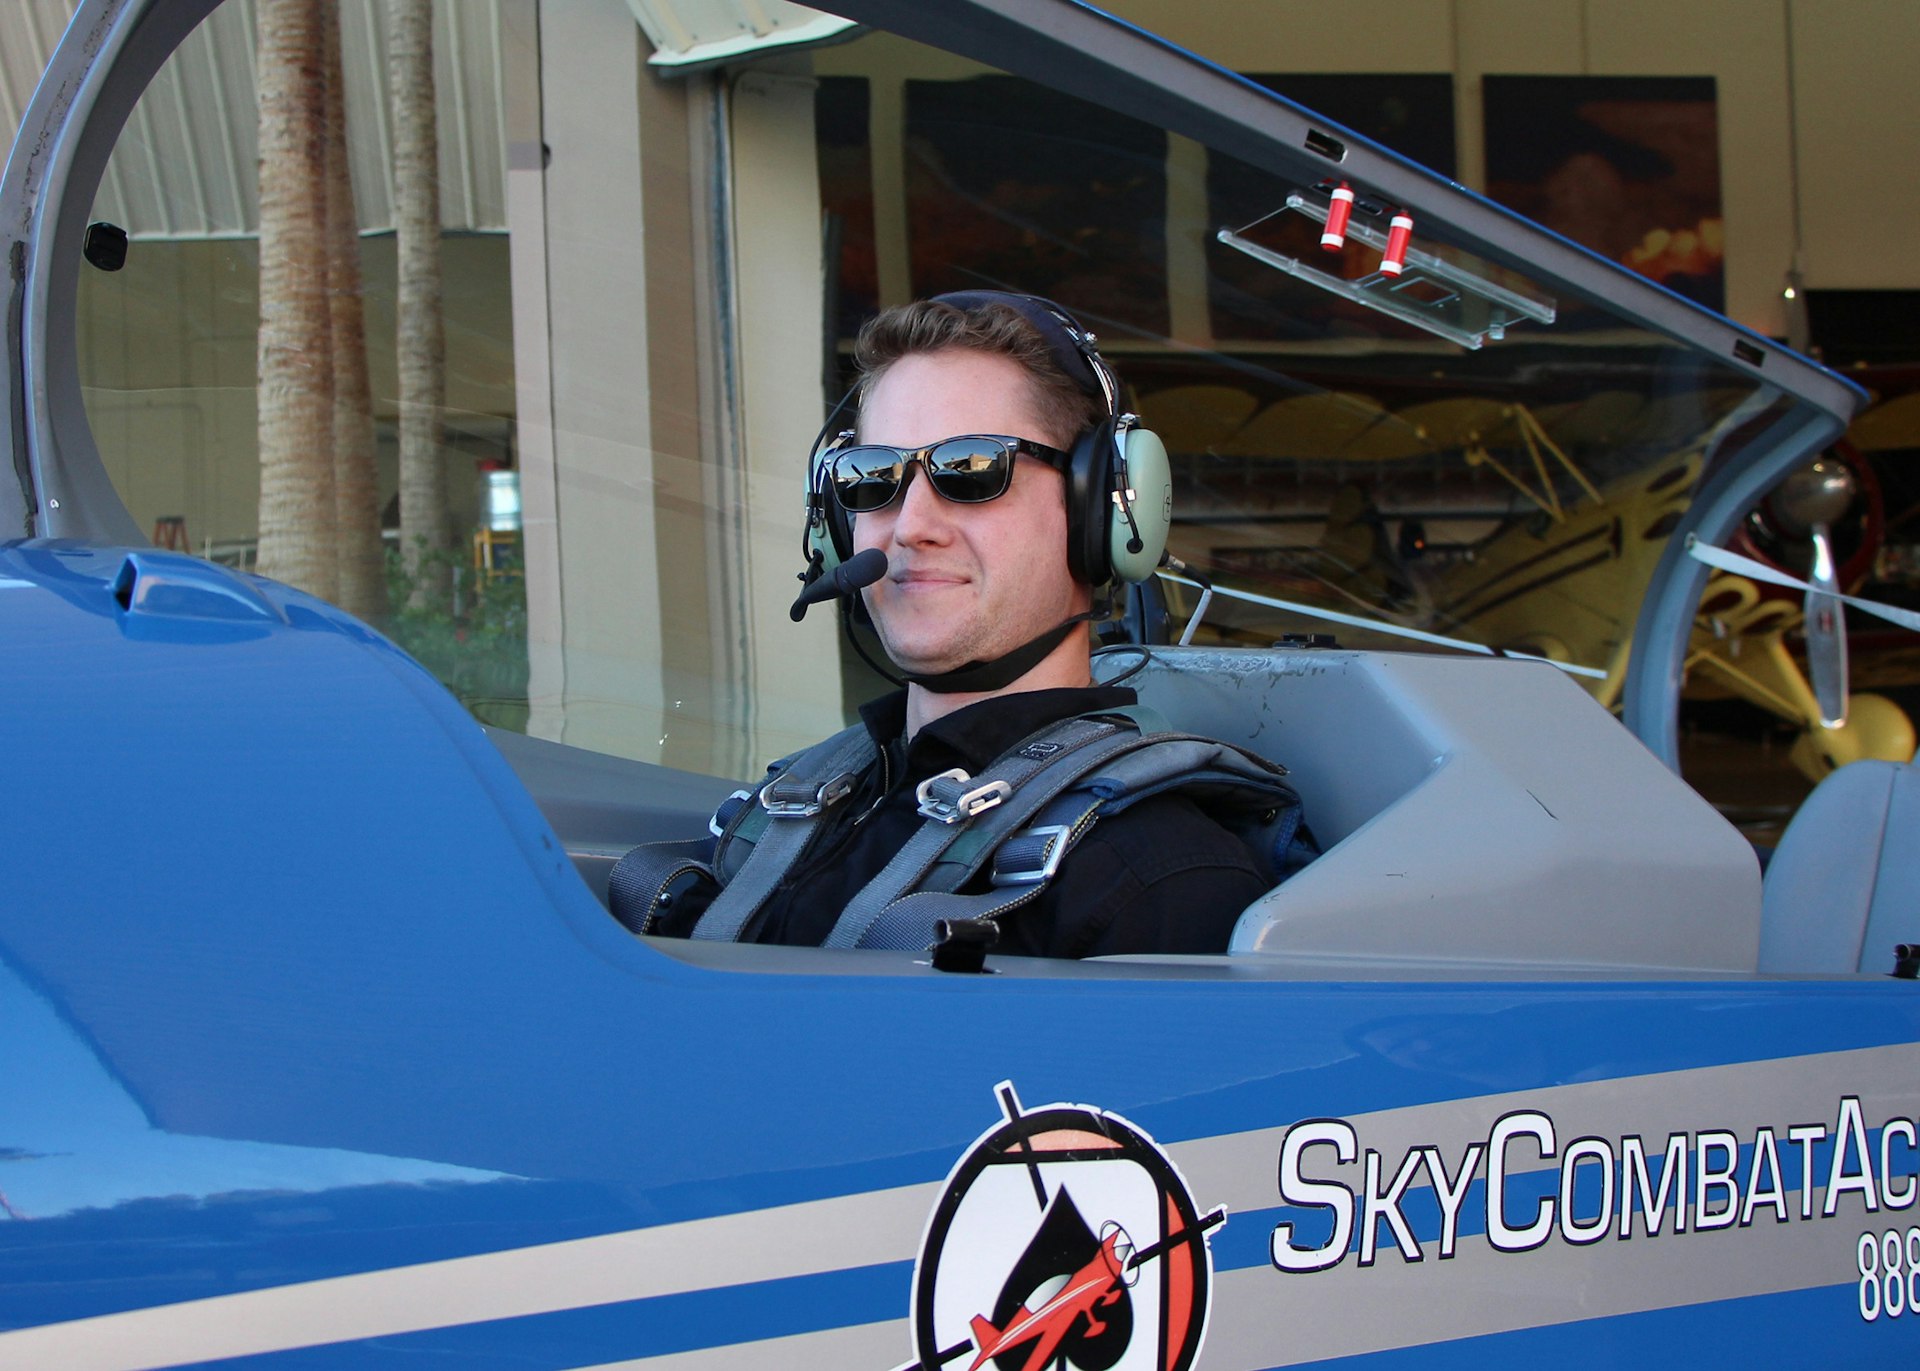 Our author tries to maintain his cool before taking to the sky. Image courtesy of Sky Combat Ace